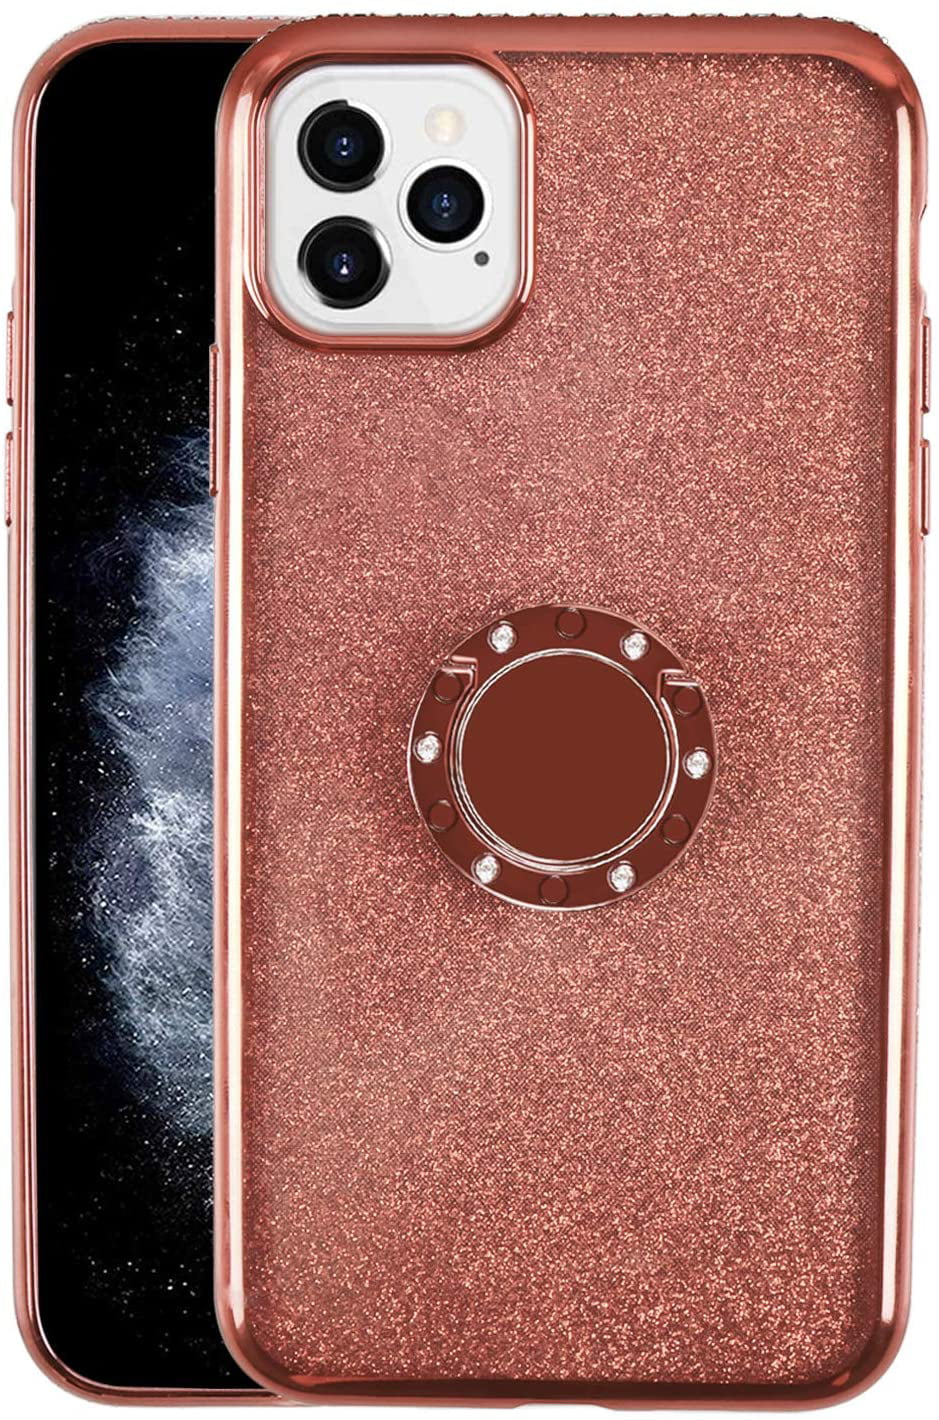 Mignova For Iphone 12 Pro Max 6 7 Case With Ring Holder Glitter Bling Cover For Girls Women Sparkly Pretty Fancy Cute Rhinestone With Kickstand Case For Iphone 12 Pro Max 6 7 Inch